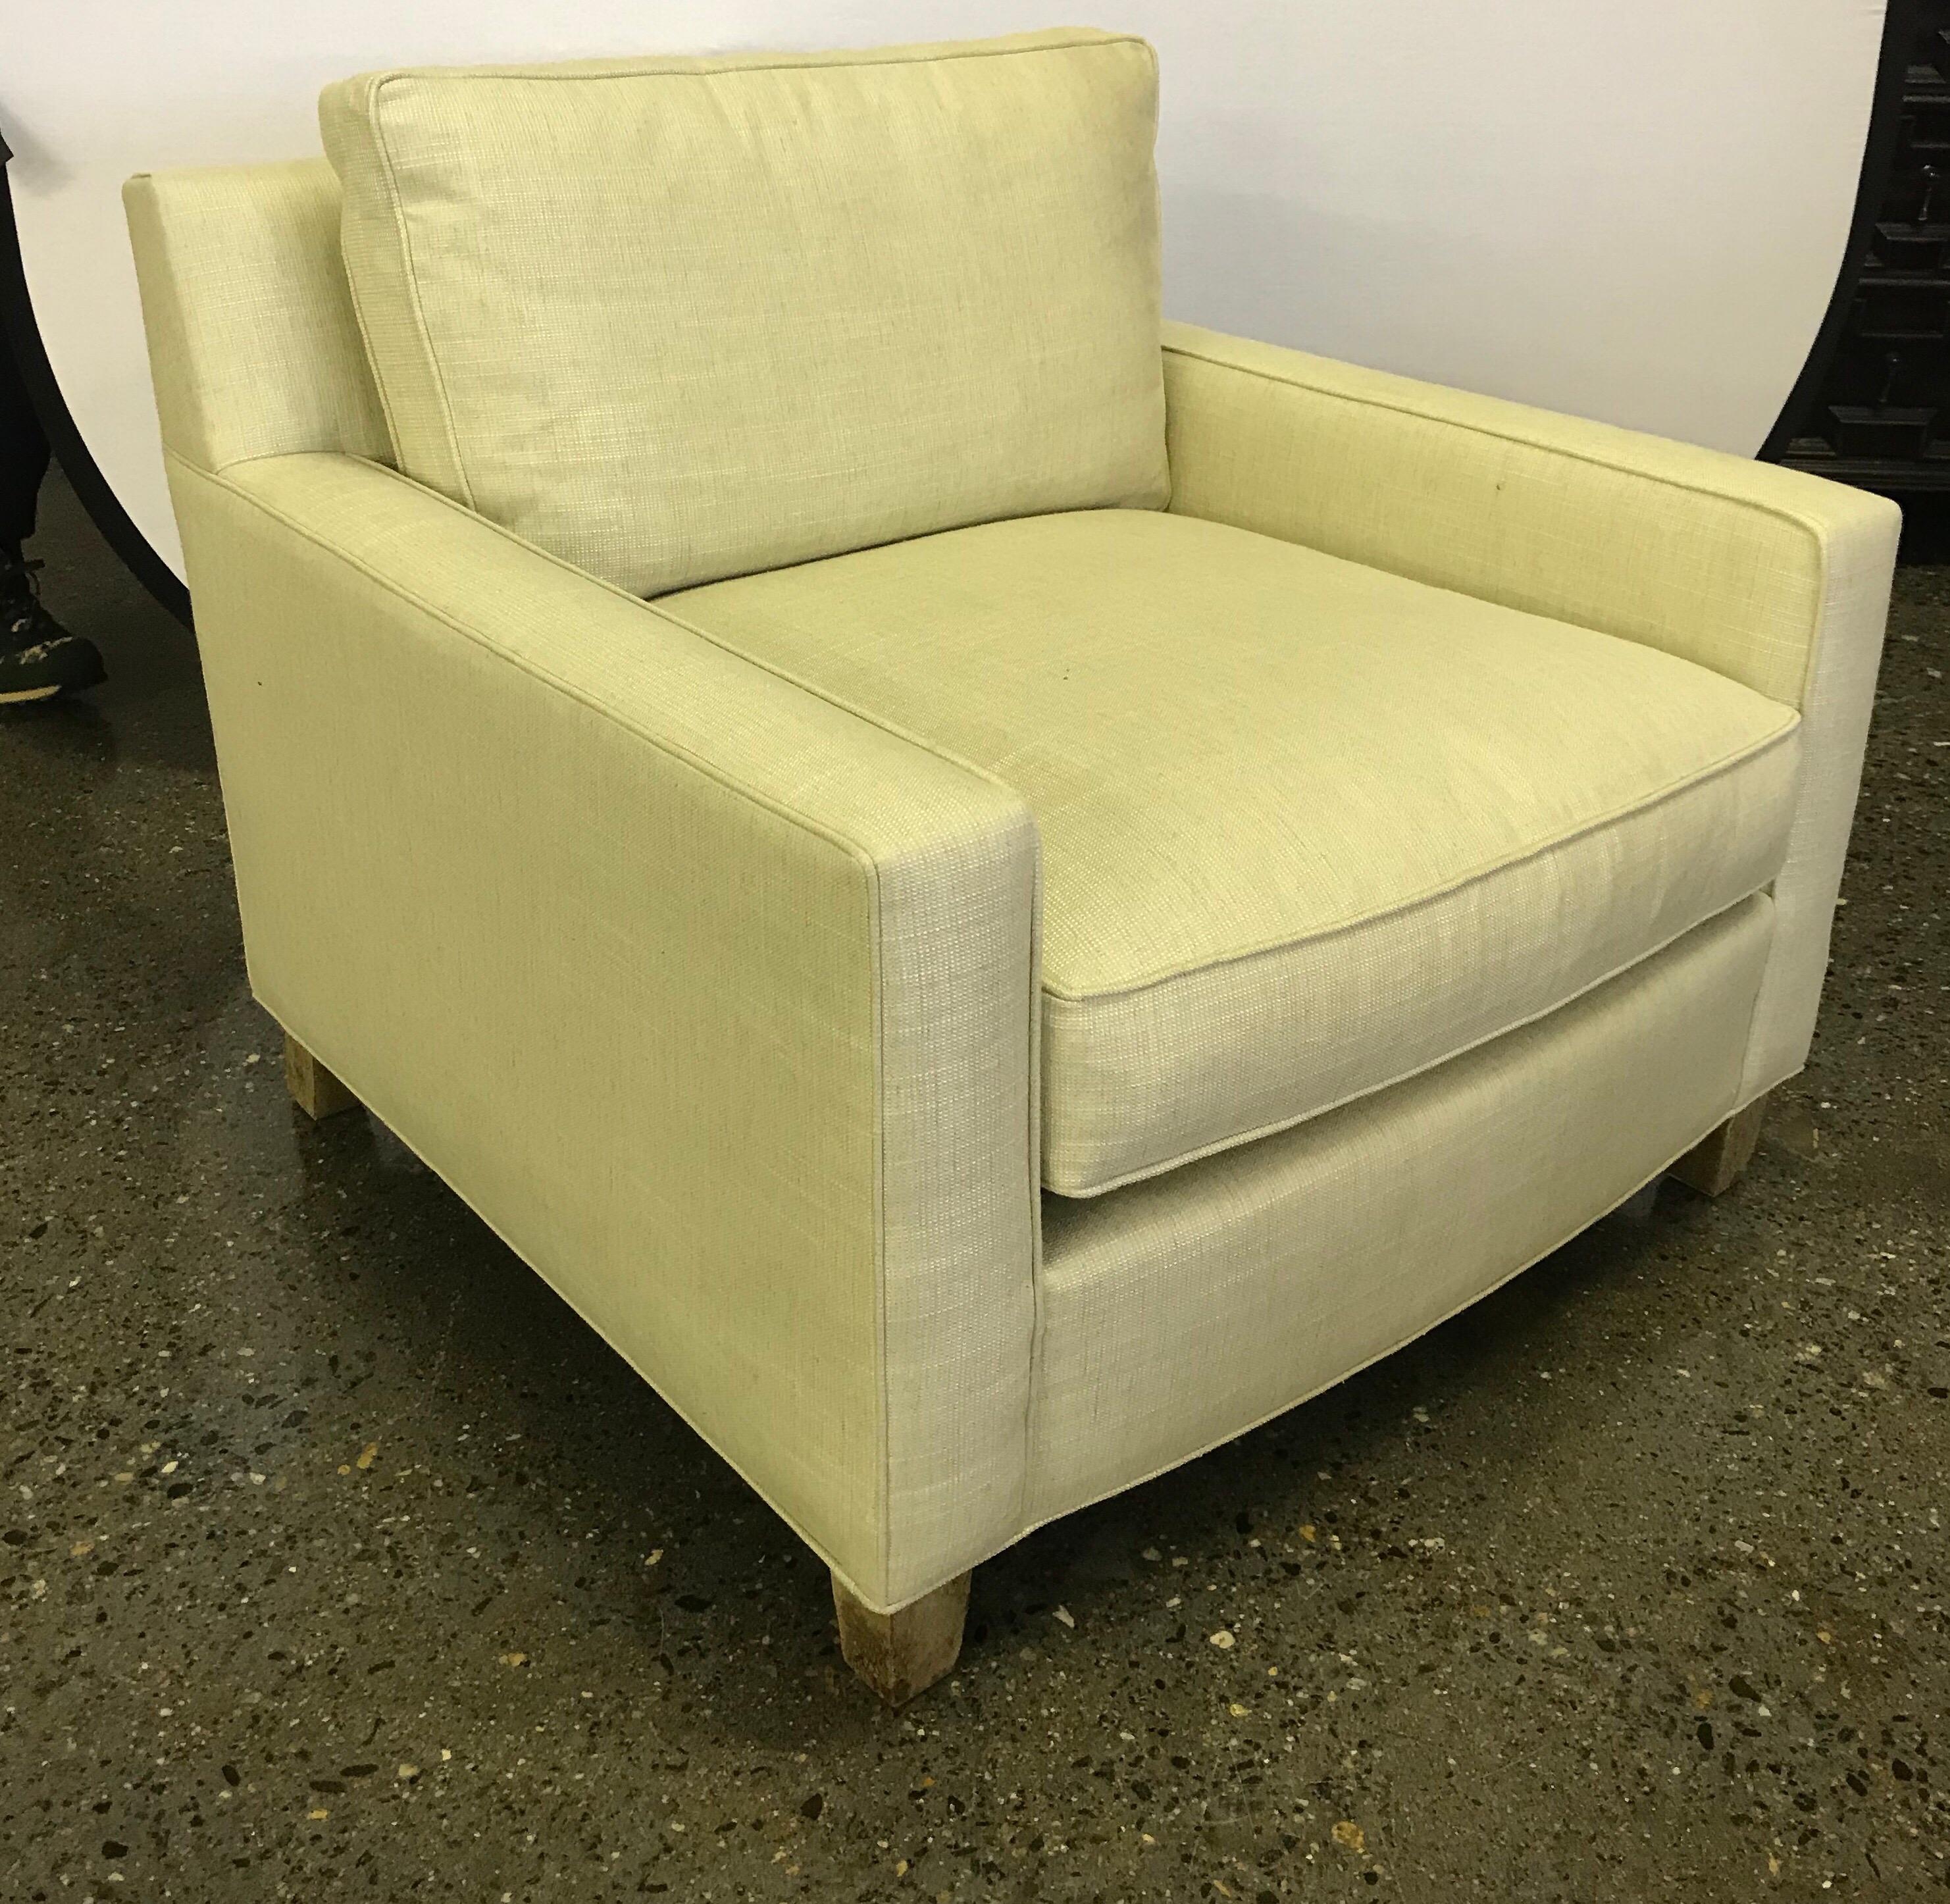 Midcentury style lounge chair has a deep comfortable seat and a wonderful modern aesthetic. Upholstery is pale yellow. Comes with two matching pillows. By Hickory Chair Furniture Company.